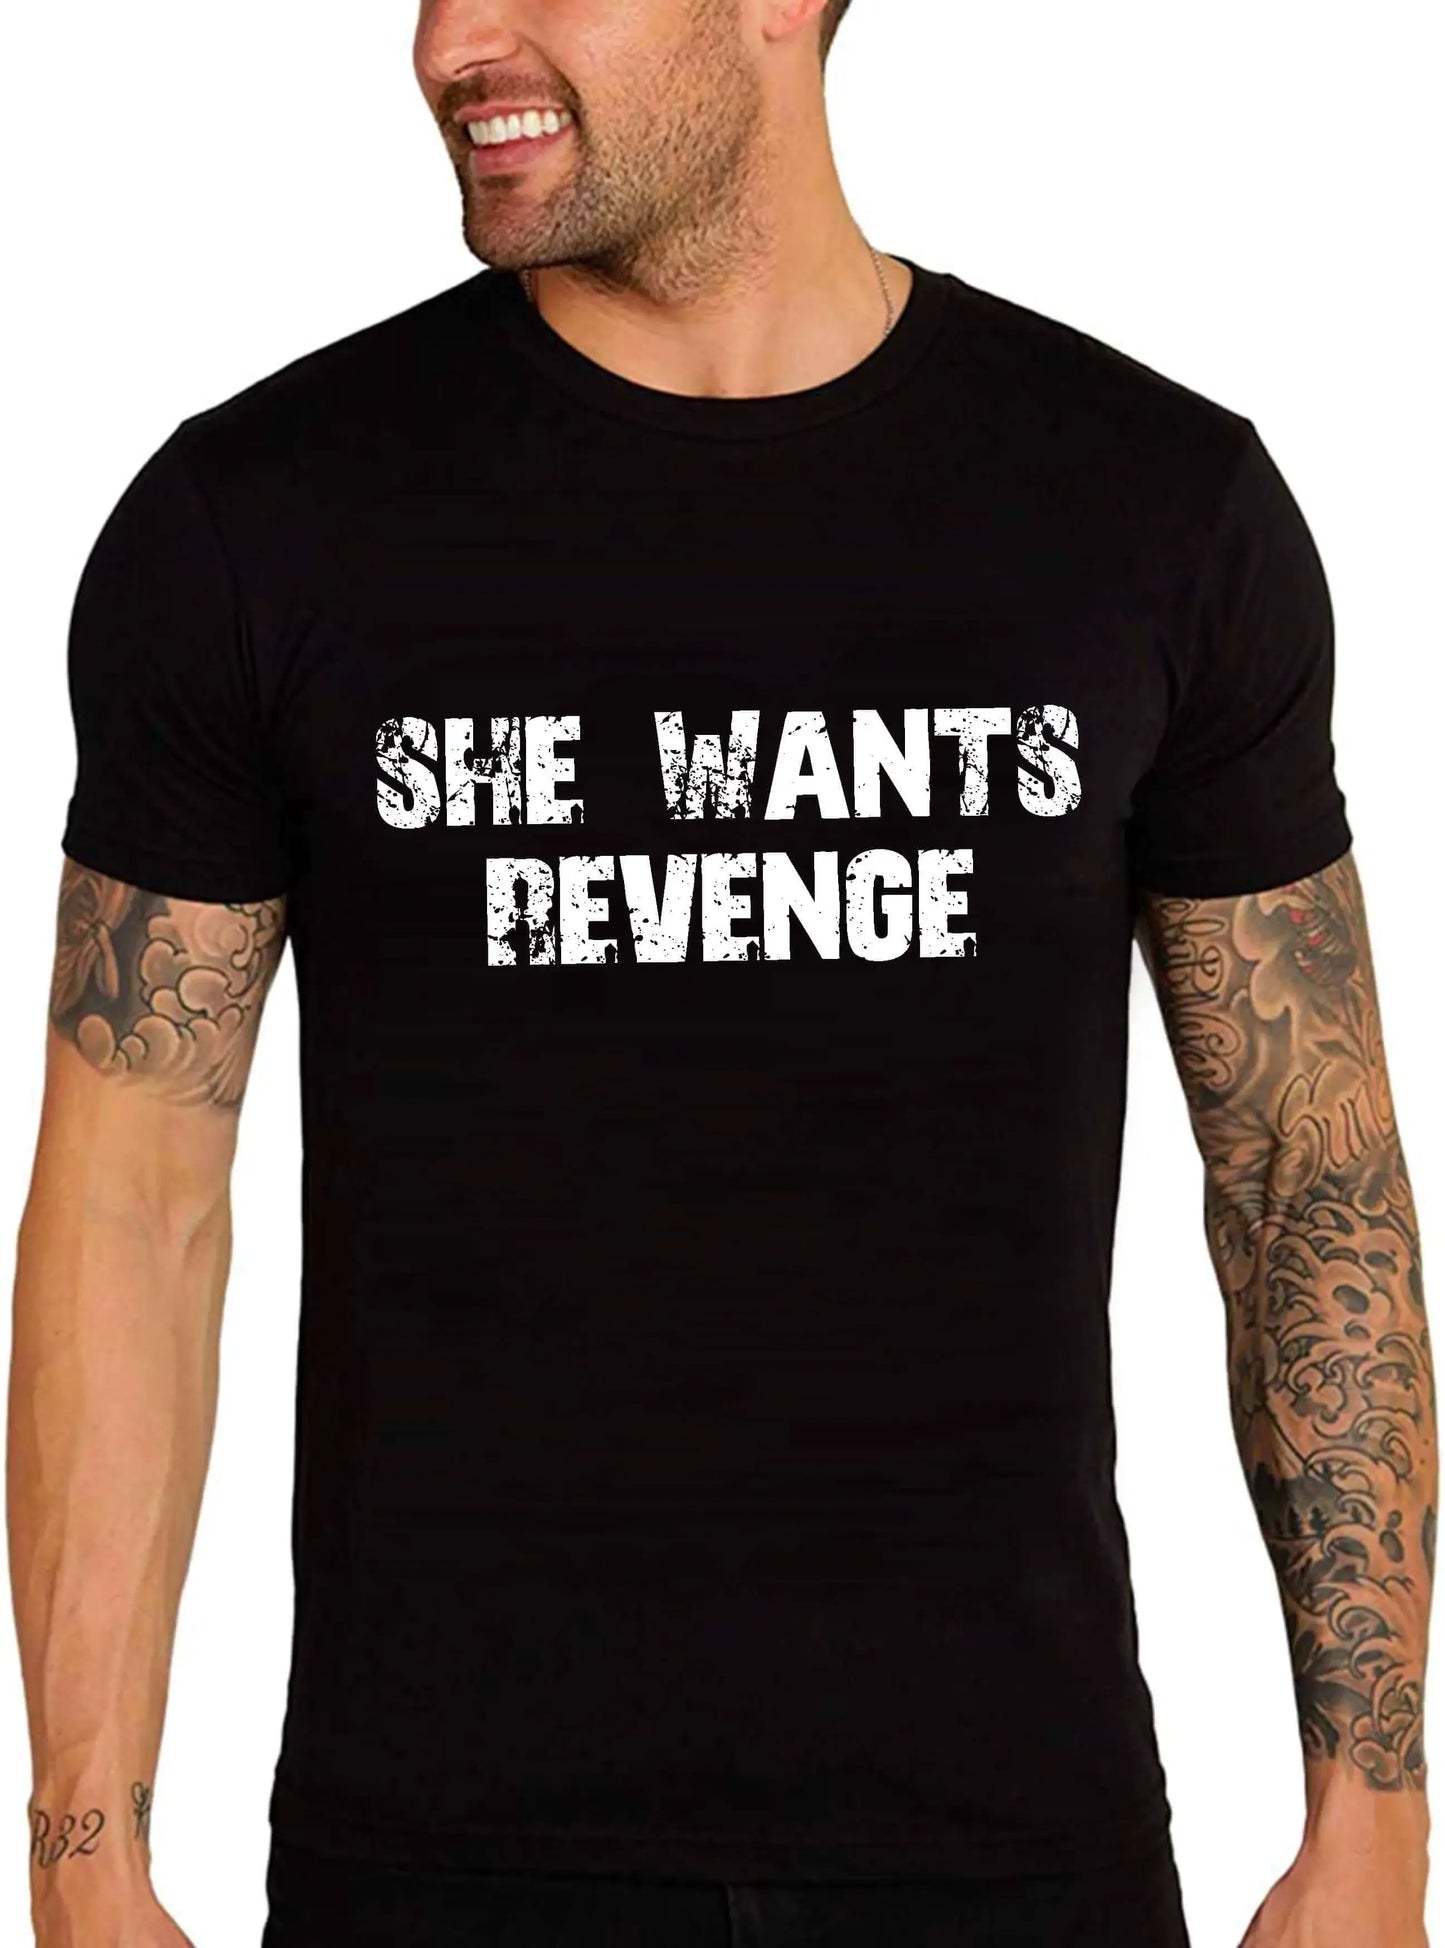 Men's Graphic T-Shirt She Wants Revenge Eco-Friendly Limited Edition Short Sleeve Tee-Shirt Vintage Birthday Gift Novelty